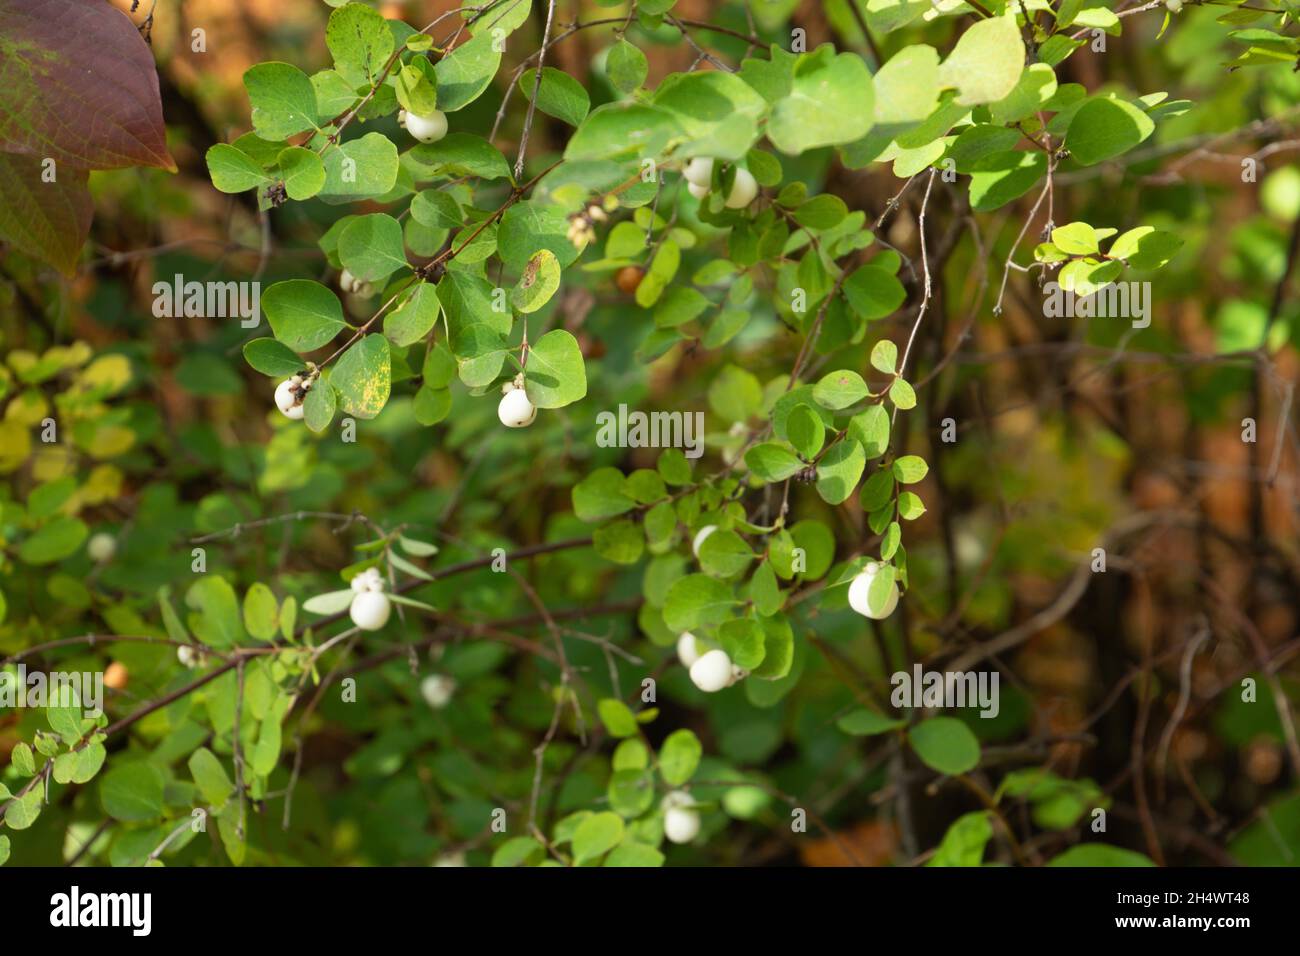 autumn background with the Common Snowberry plant with some Decorative berries on a bush Stock Photo